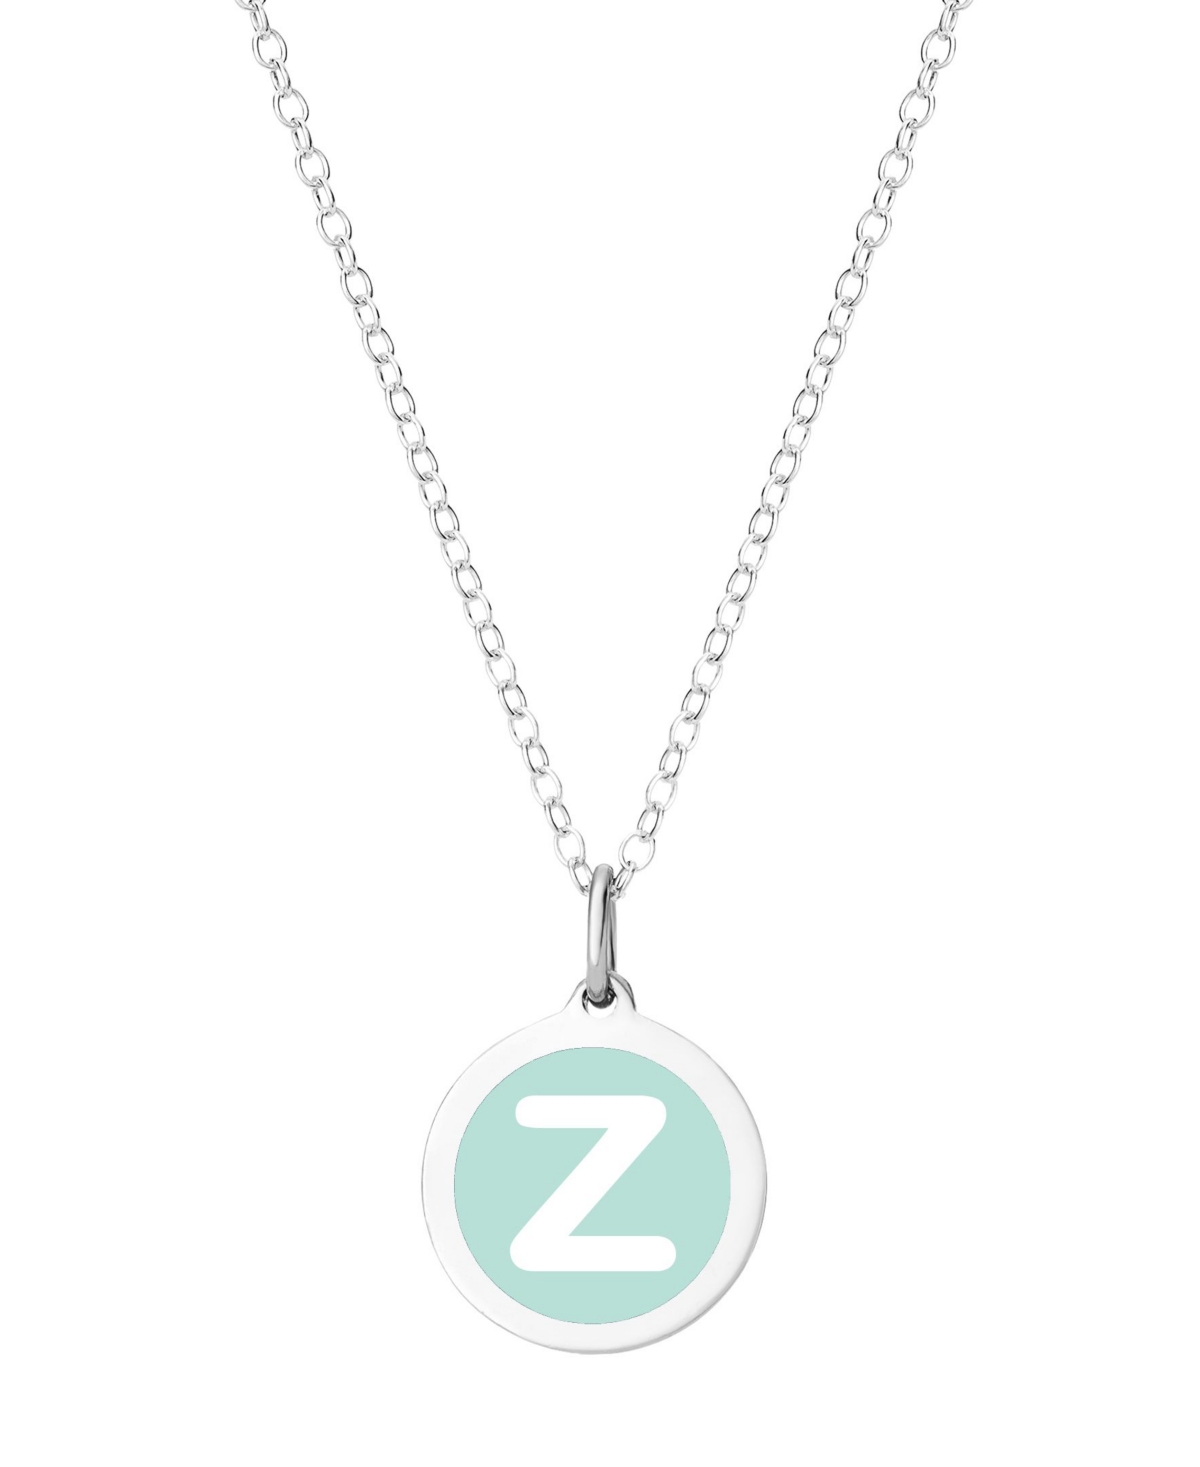 Auburn Jewelry Mini Initial Pendant Necklace in Sterling Silver and Mint Enamel, 16" + 2" Extender